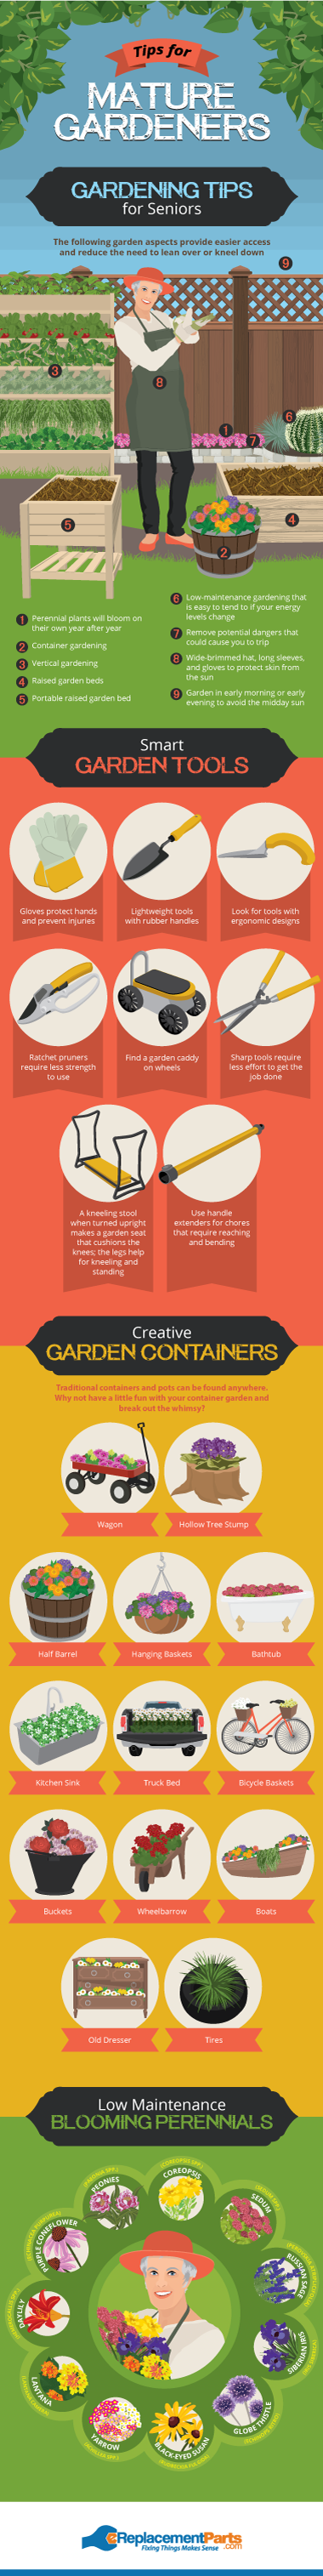 Tips For Mature Gardeners